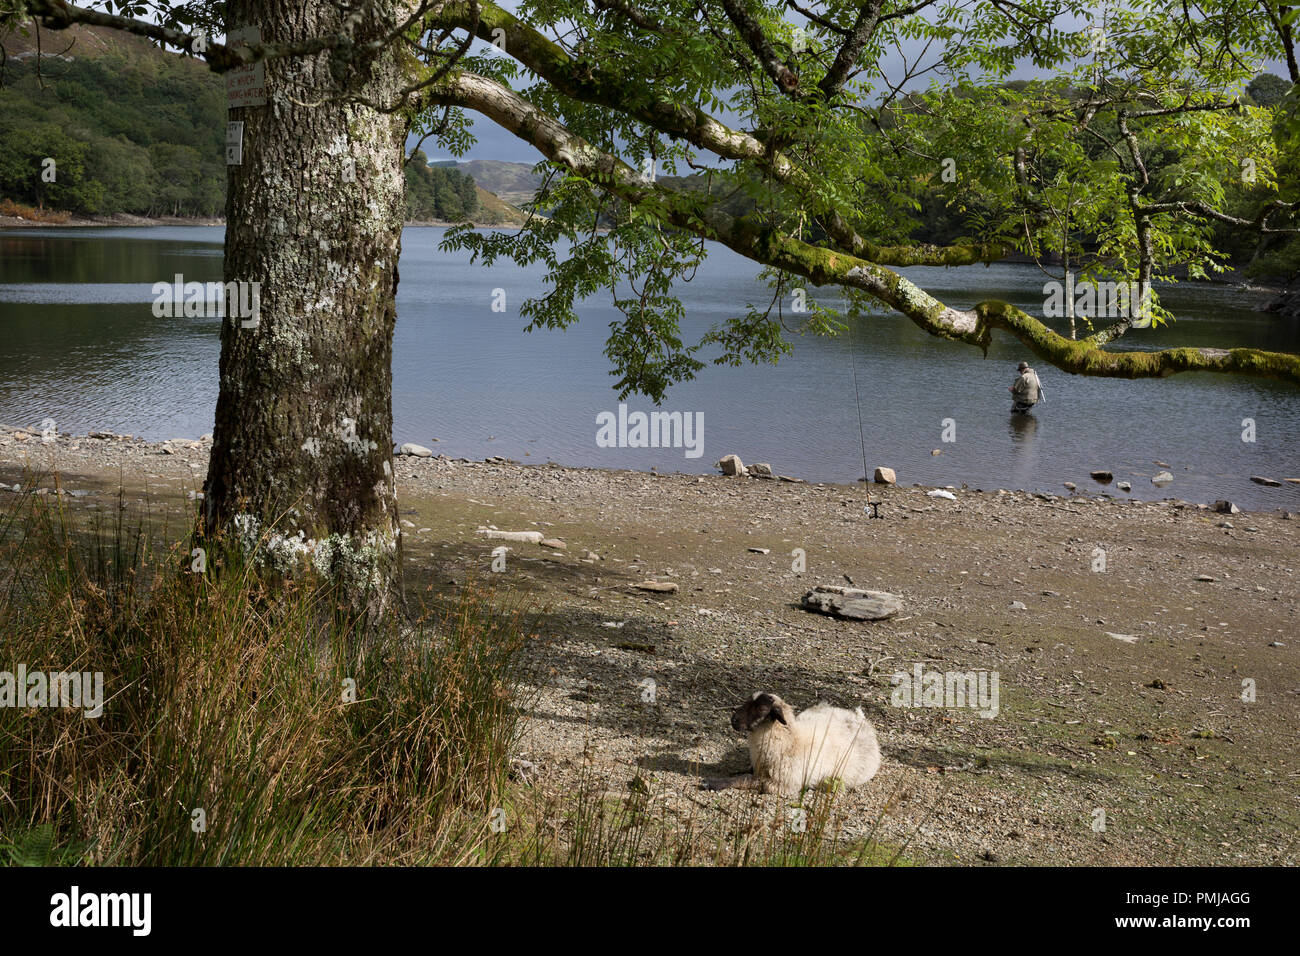 A single sheep rests beneath a tree while a freshwater angler casts off in the reduced waters of (Lake) Lyn Cynwch after the summer heatwave when lack of rainfall has lowered water levels, on 13th September 2018, in Dolgellau, Gwynedd, Wales. Stock Photo